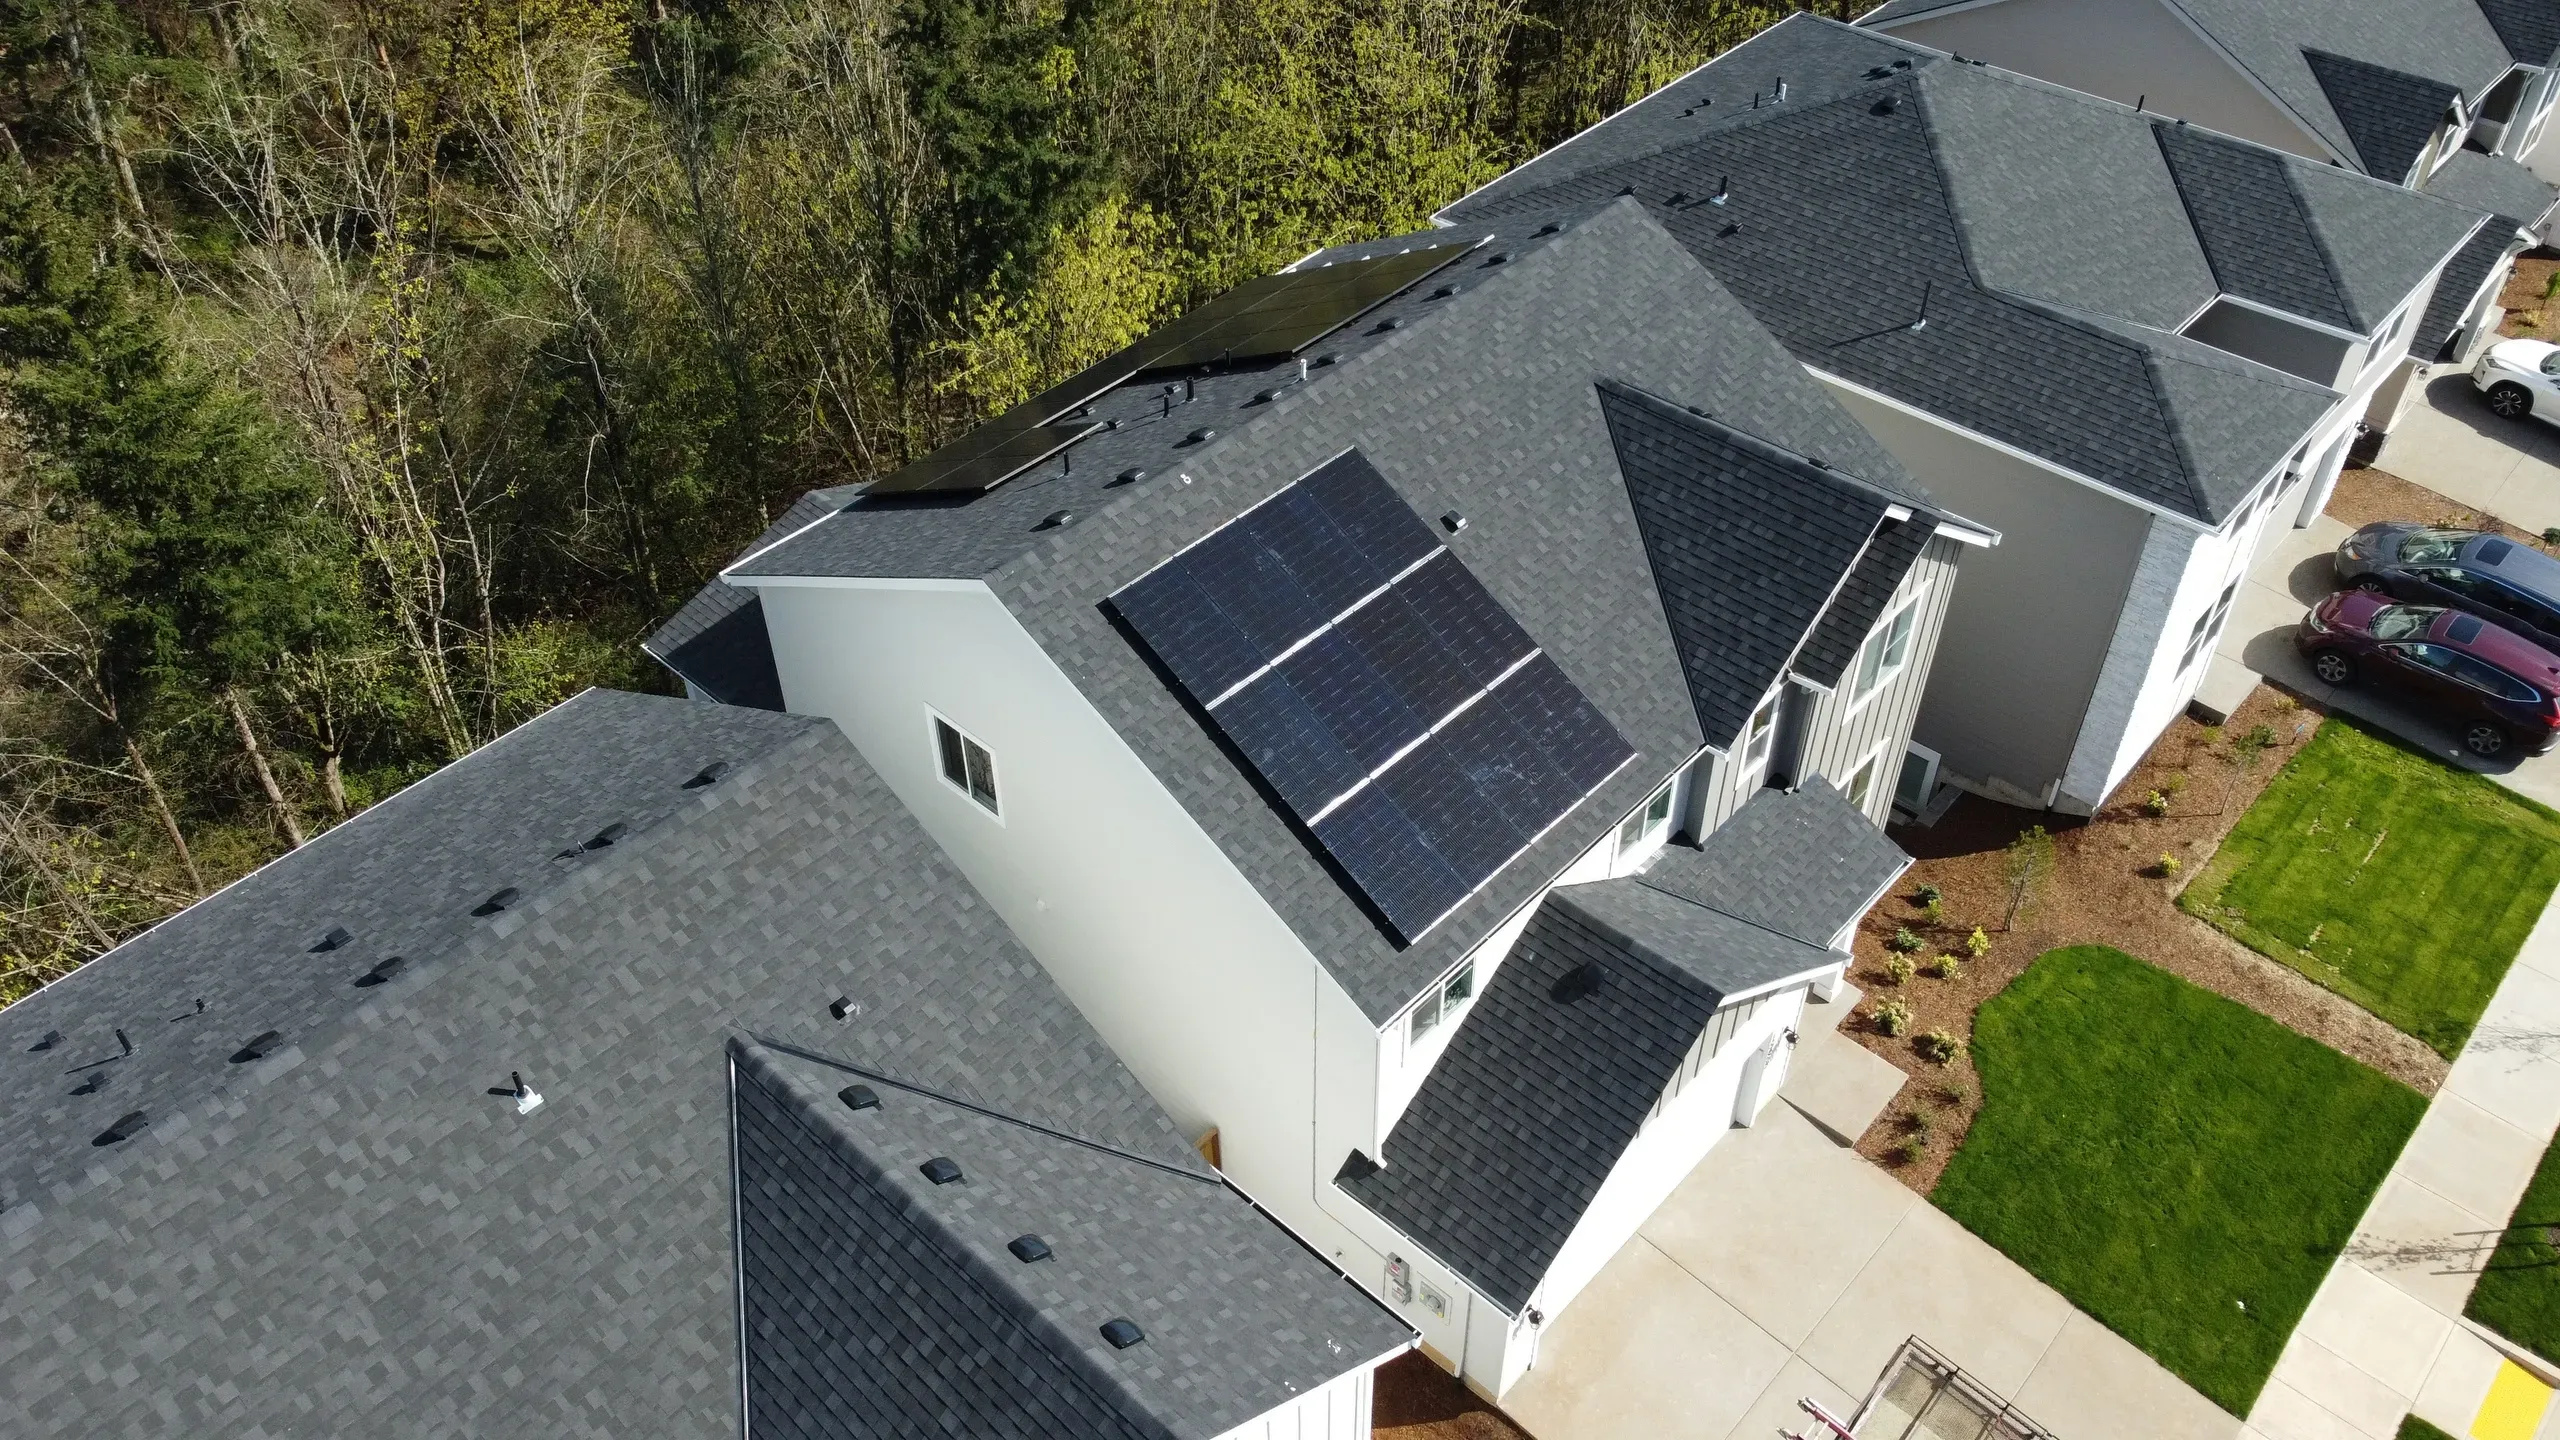 Picture of a house with solar panels on the roof. Nice neighborhood in Happy Valley, Oregon.